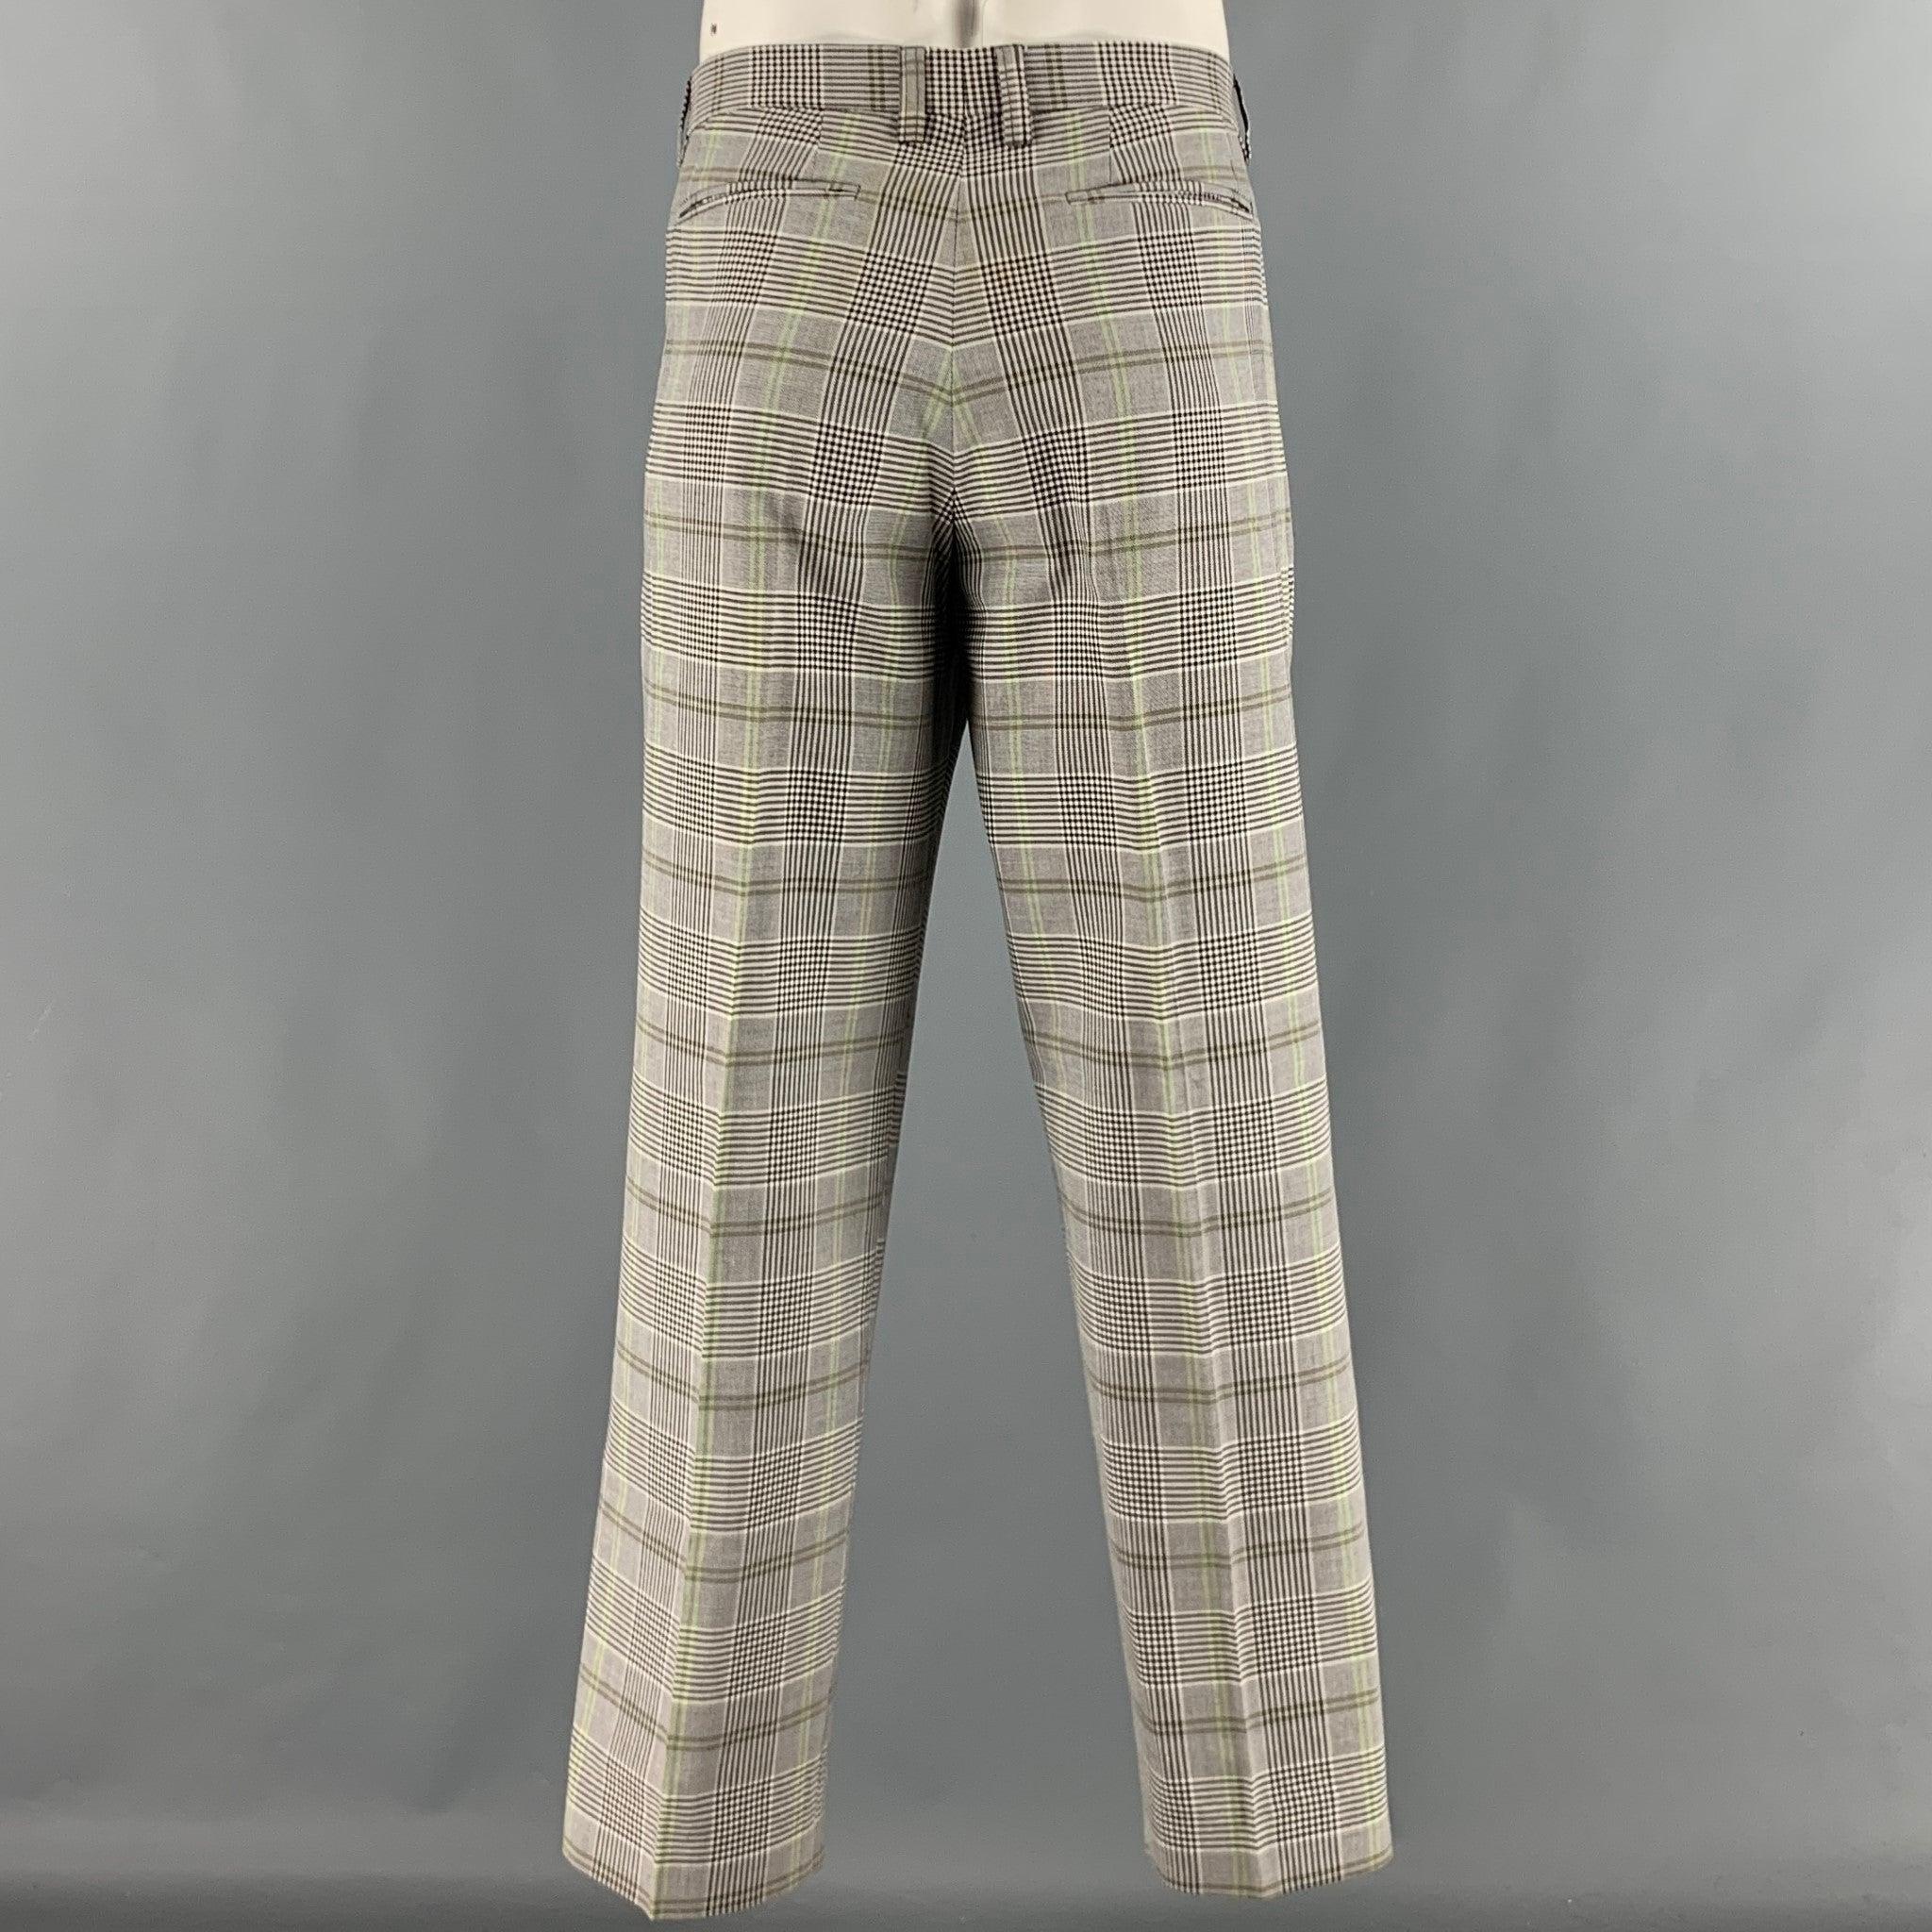 ETRO Size 36 White Black & Green Plaid Wool Cotton Zip Fly Dress Pants In Good Condition For Sale In San Francisco, CA